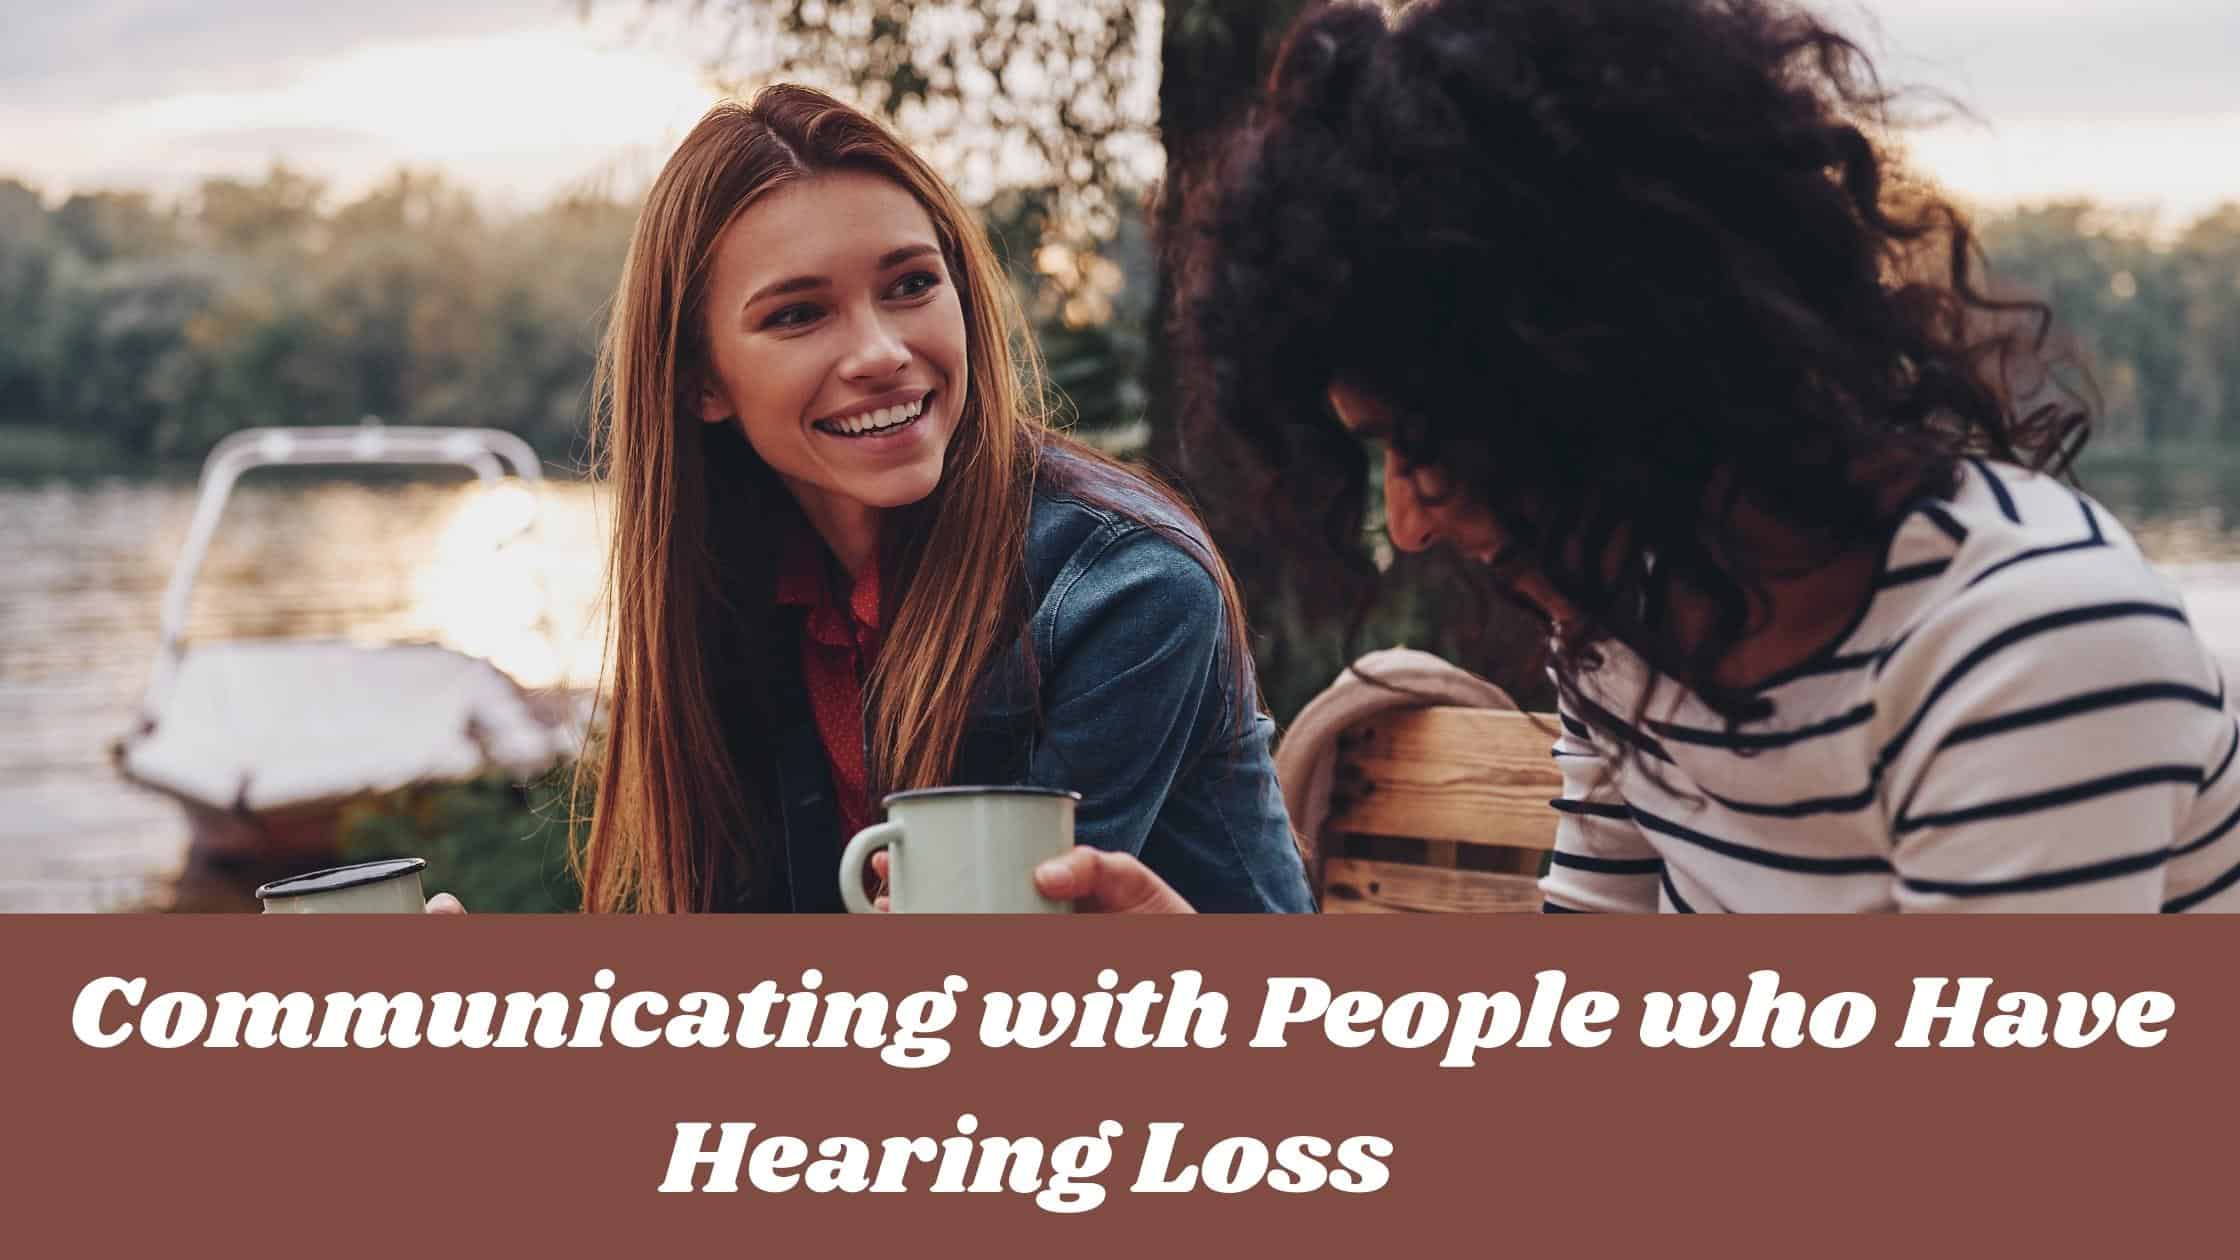 Featured image for “Communicating with People Who Have Hearing Loss”